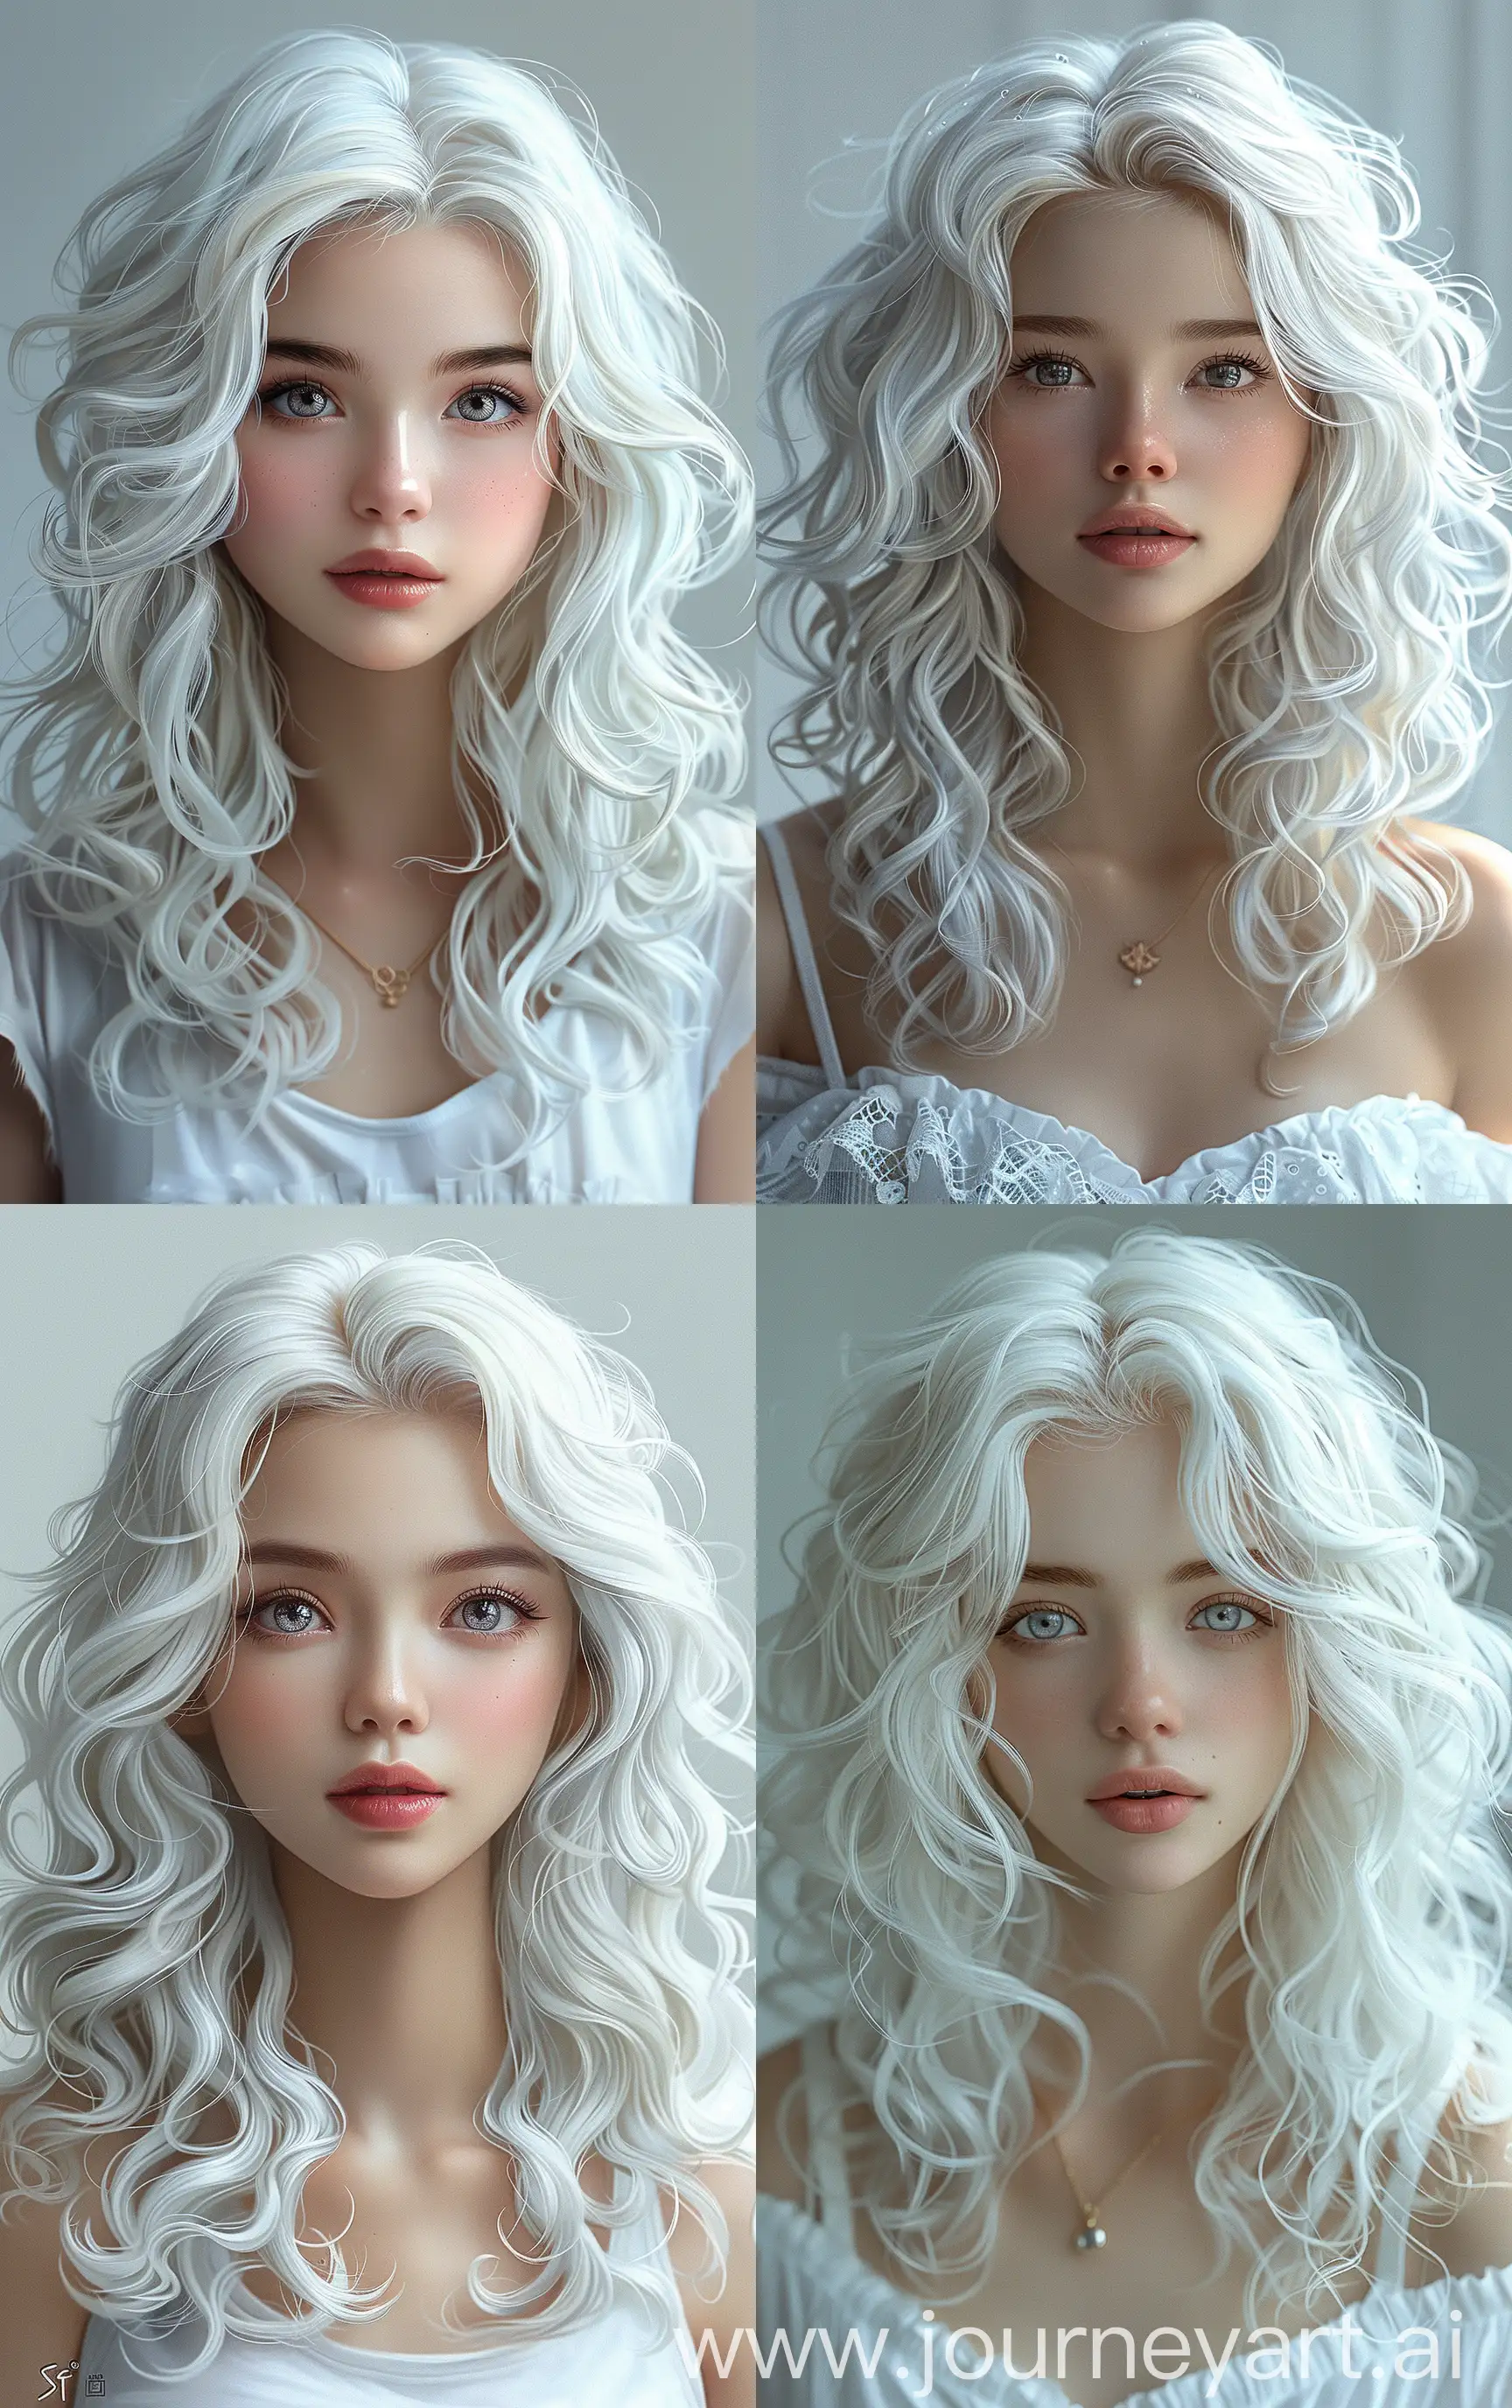 Indonesian-Anime-Girl-with-White-Features-and-Wavy-Curly-Hair